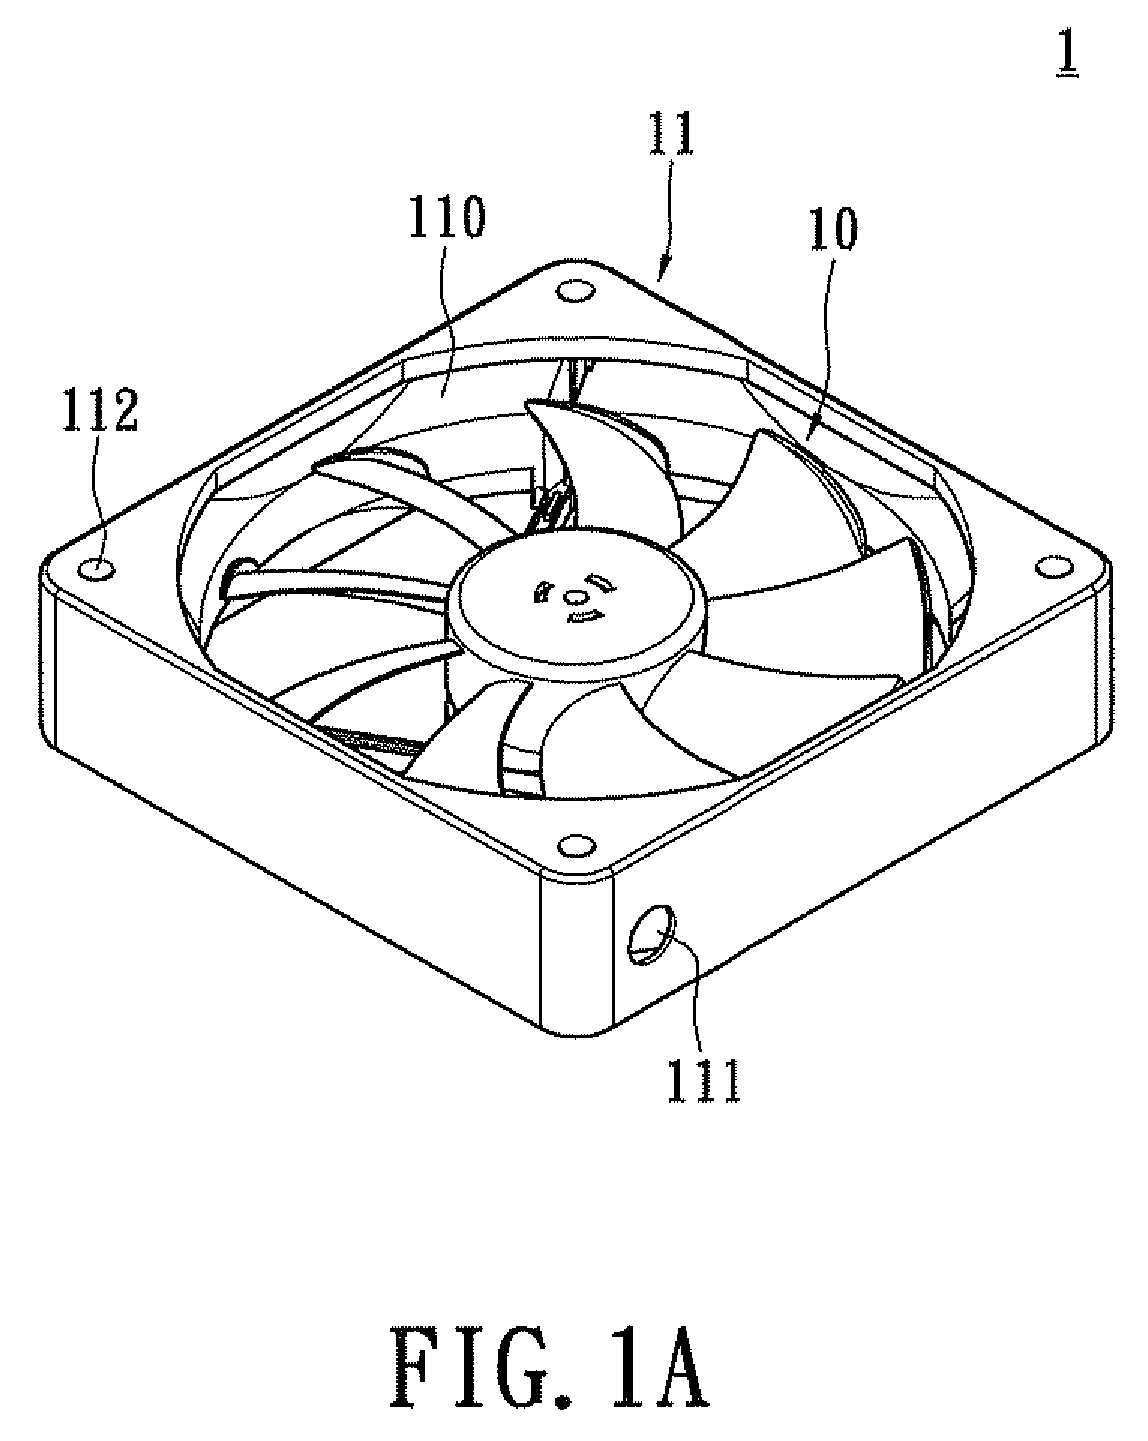 Fan device with a vibration attenuating structure